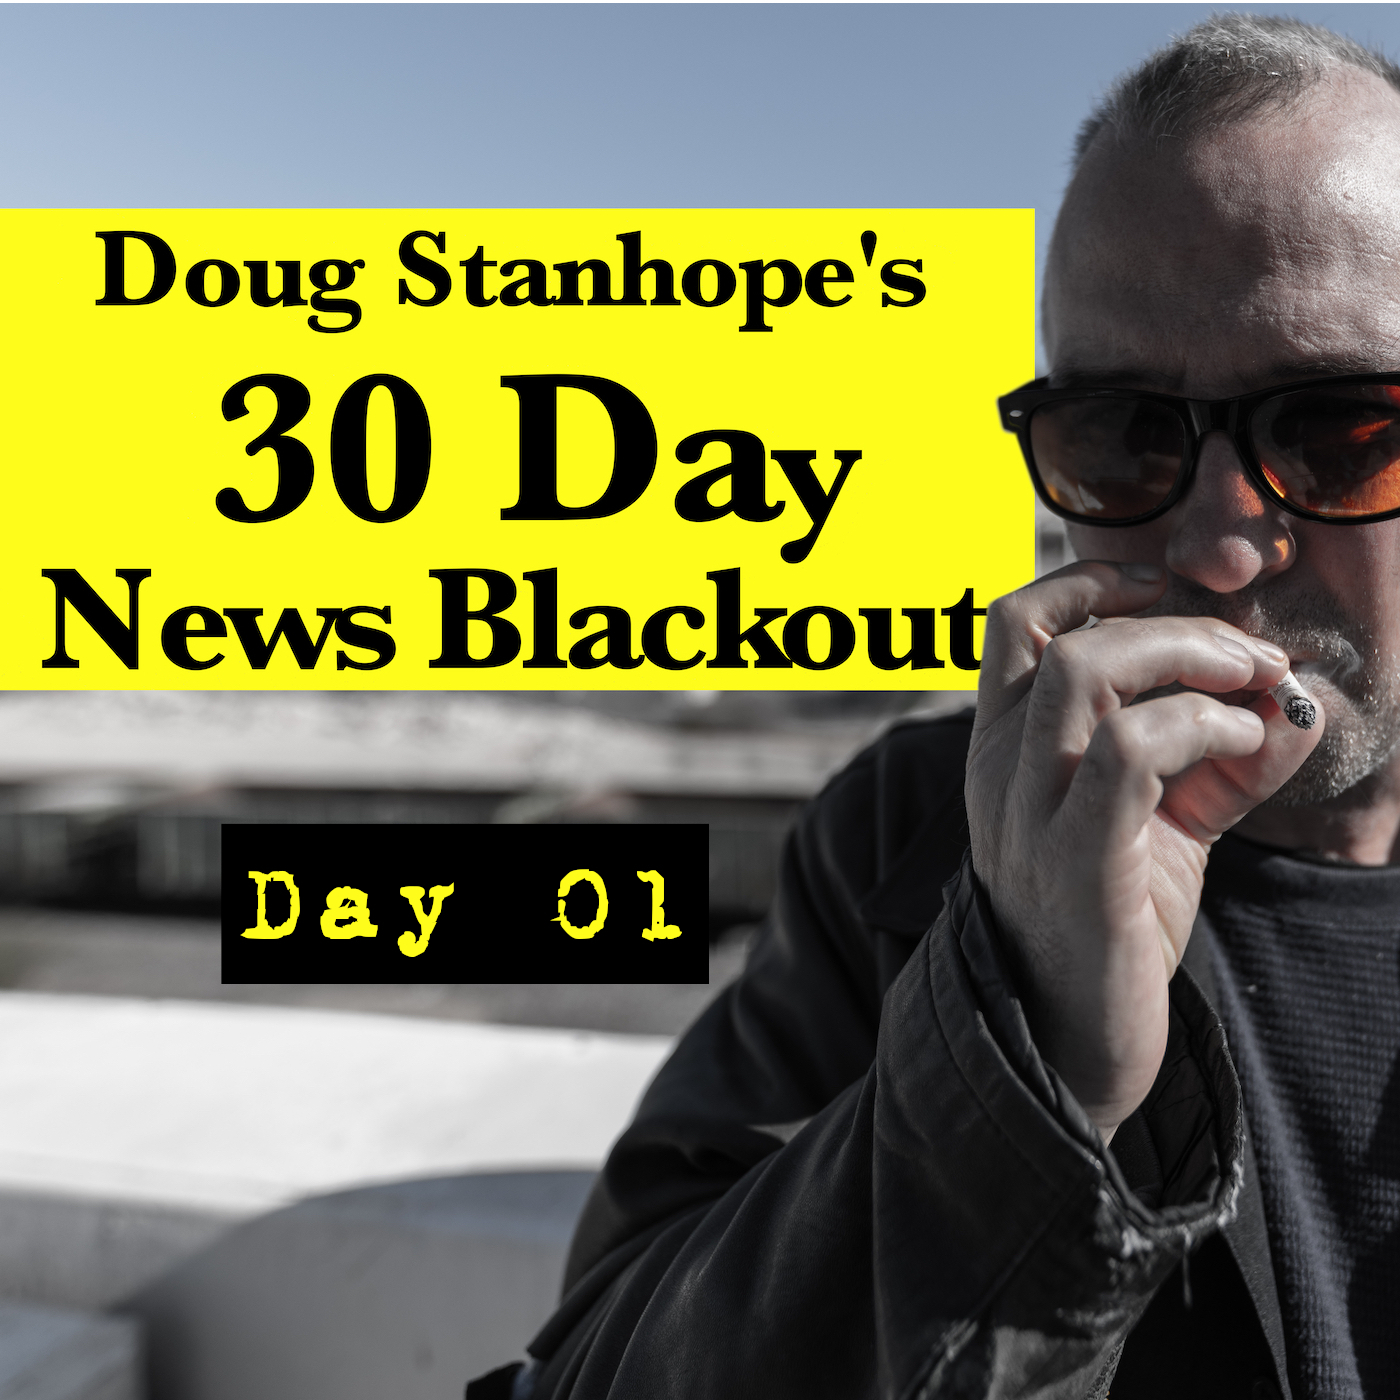 Ep.#364: Day 01 - Stanhope's 30 Day News Blackout